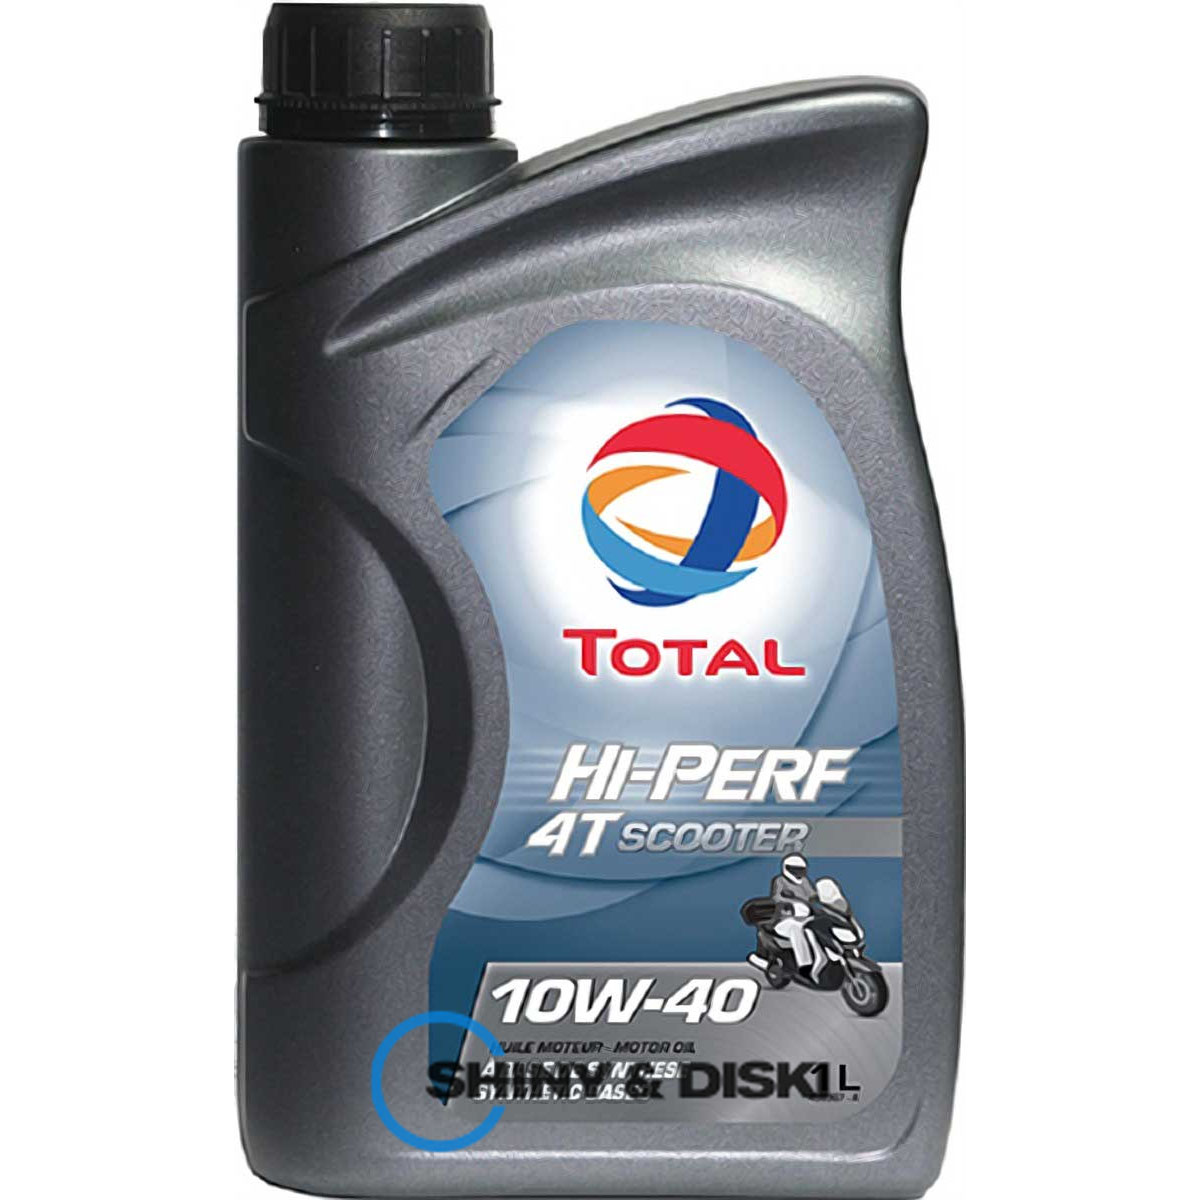 total hi-perf 4t scooter 10w-40 (1л)